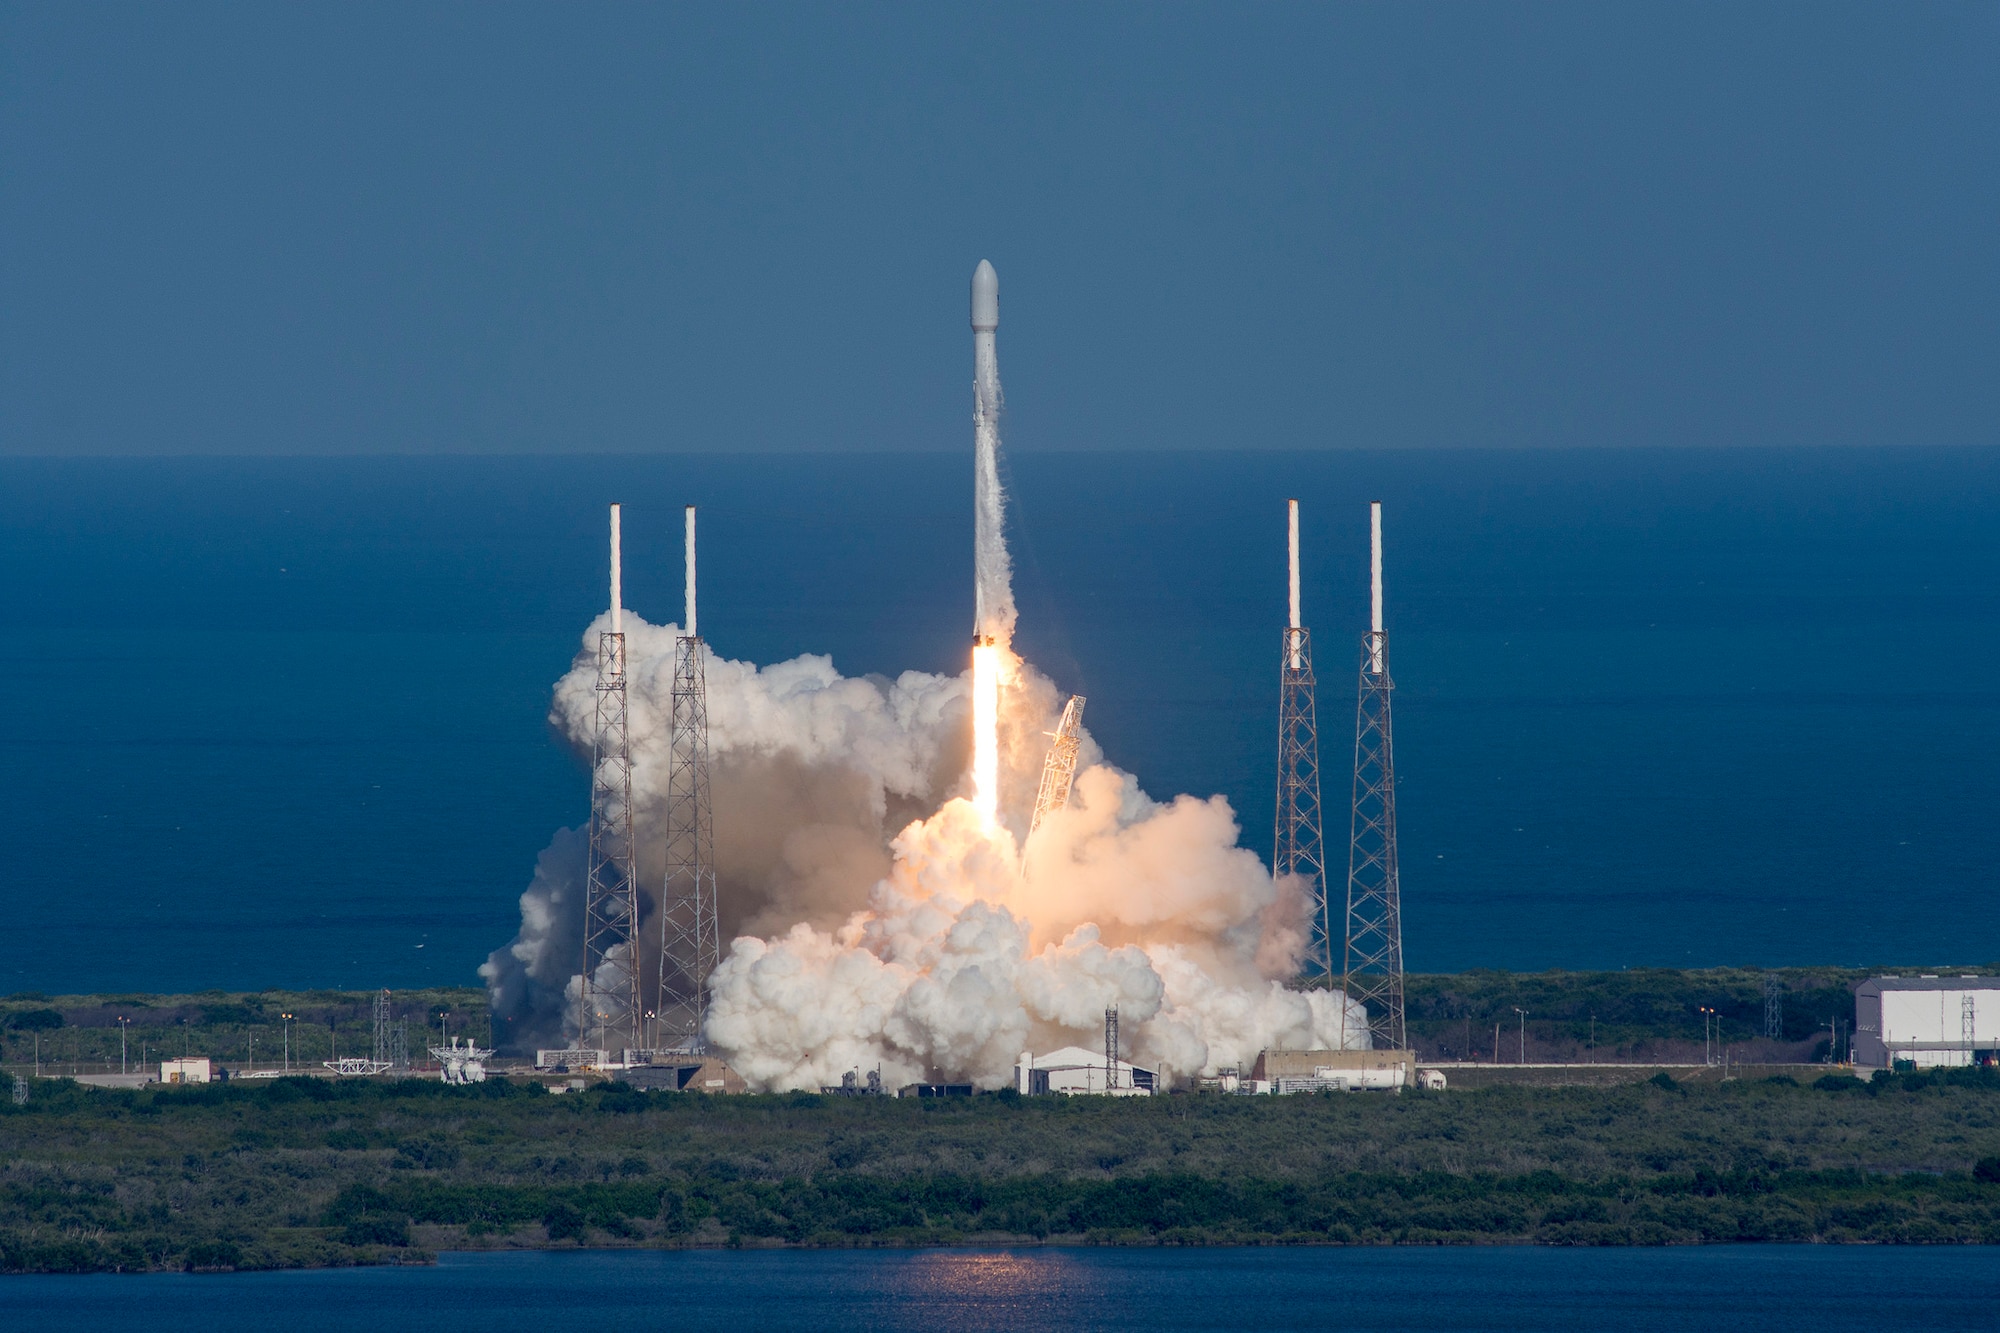 The U.S. Air Force’s 45th Space Wing supported the successful SpaceX Falcon 9 THAICOM-8 launch May 27, 2016, at 5:39 p.m. ET from Launch Complex 40 at Cape Canaveral Air Force Station, Florida. (Courtsey photo by SpaceX)